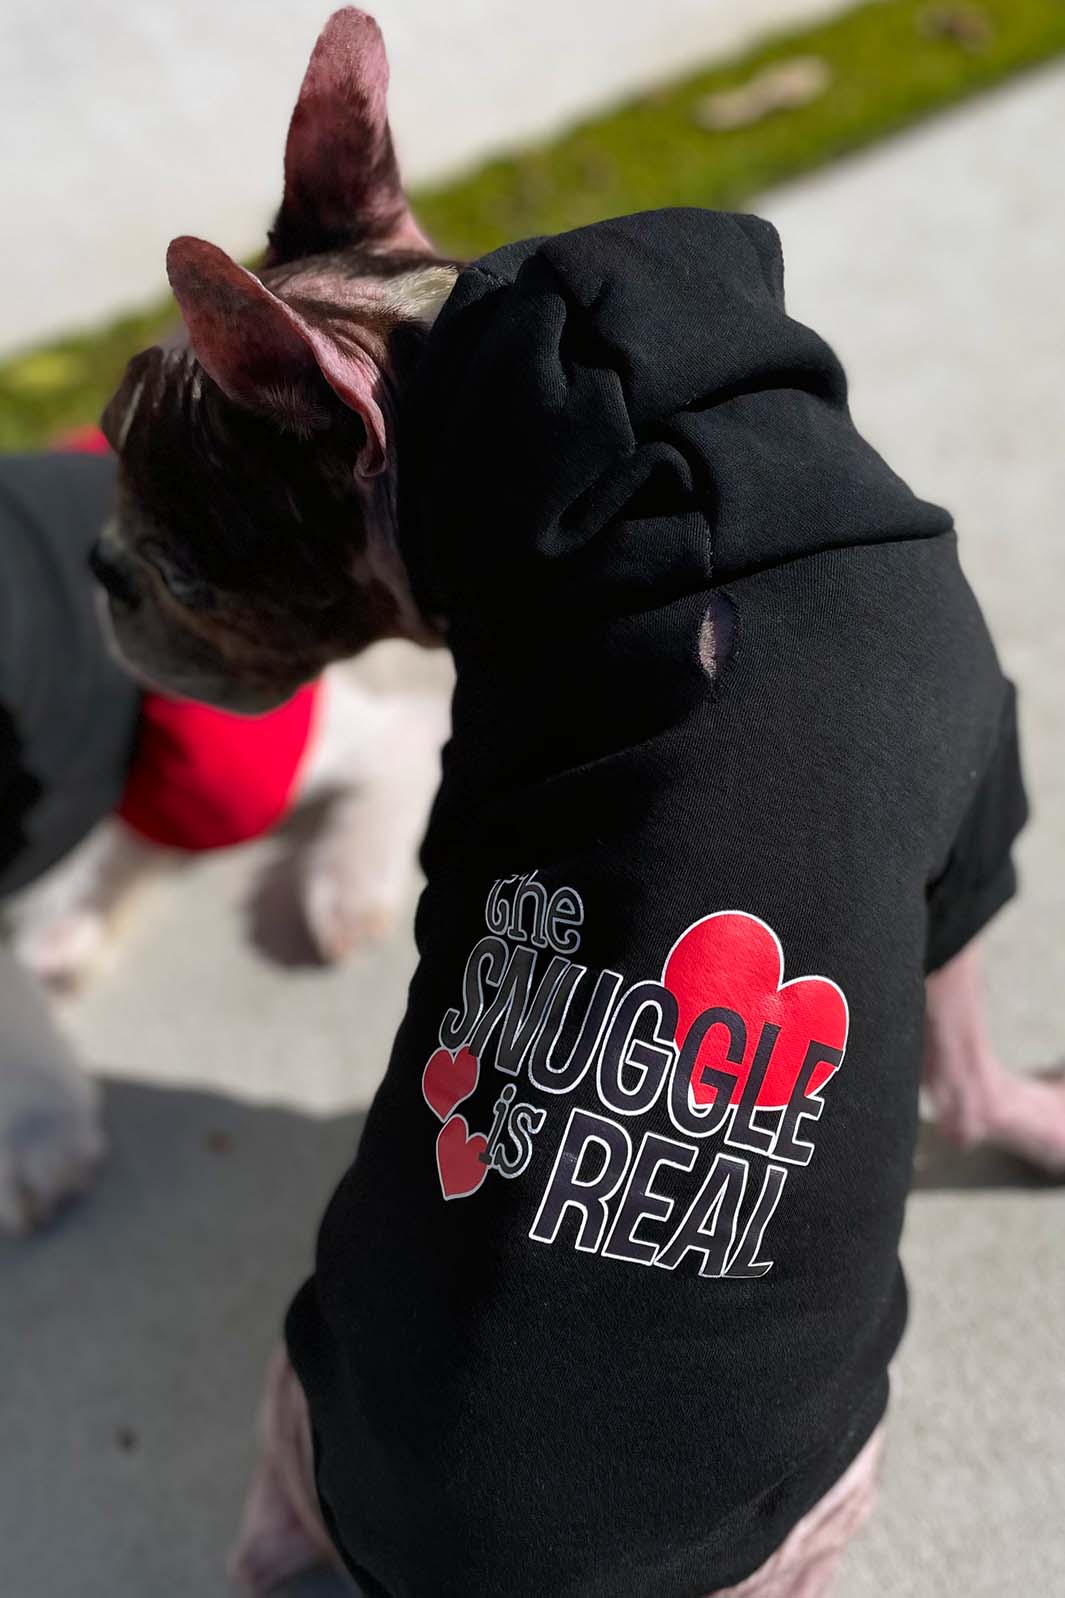 Dilla, a French Bulldog and Boston Terrier mix, sitting down and showing off the back of The Snuggle is Real Black Dog Hoodie from online dog clothing store they made me wear it.